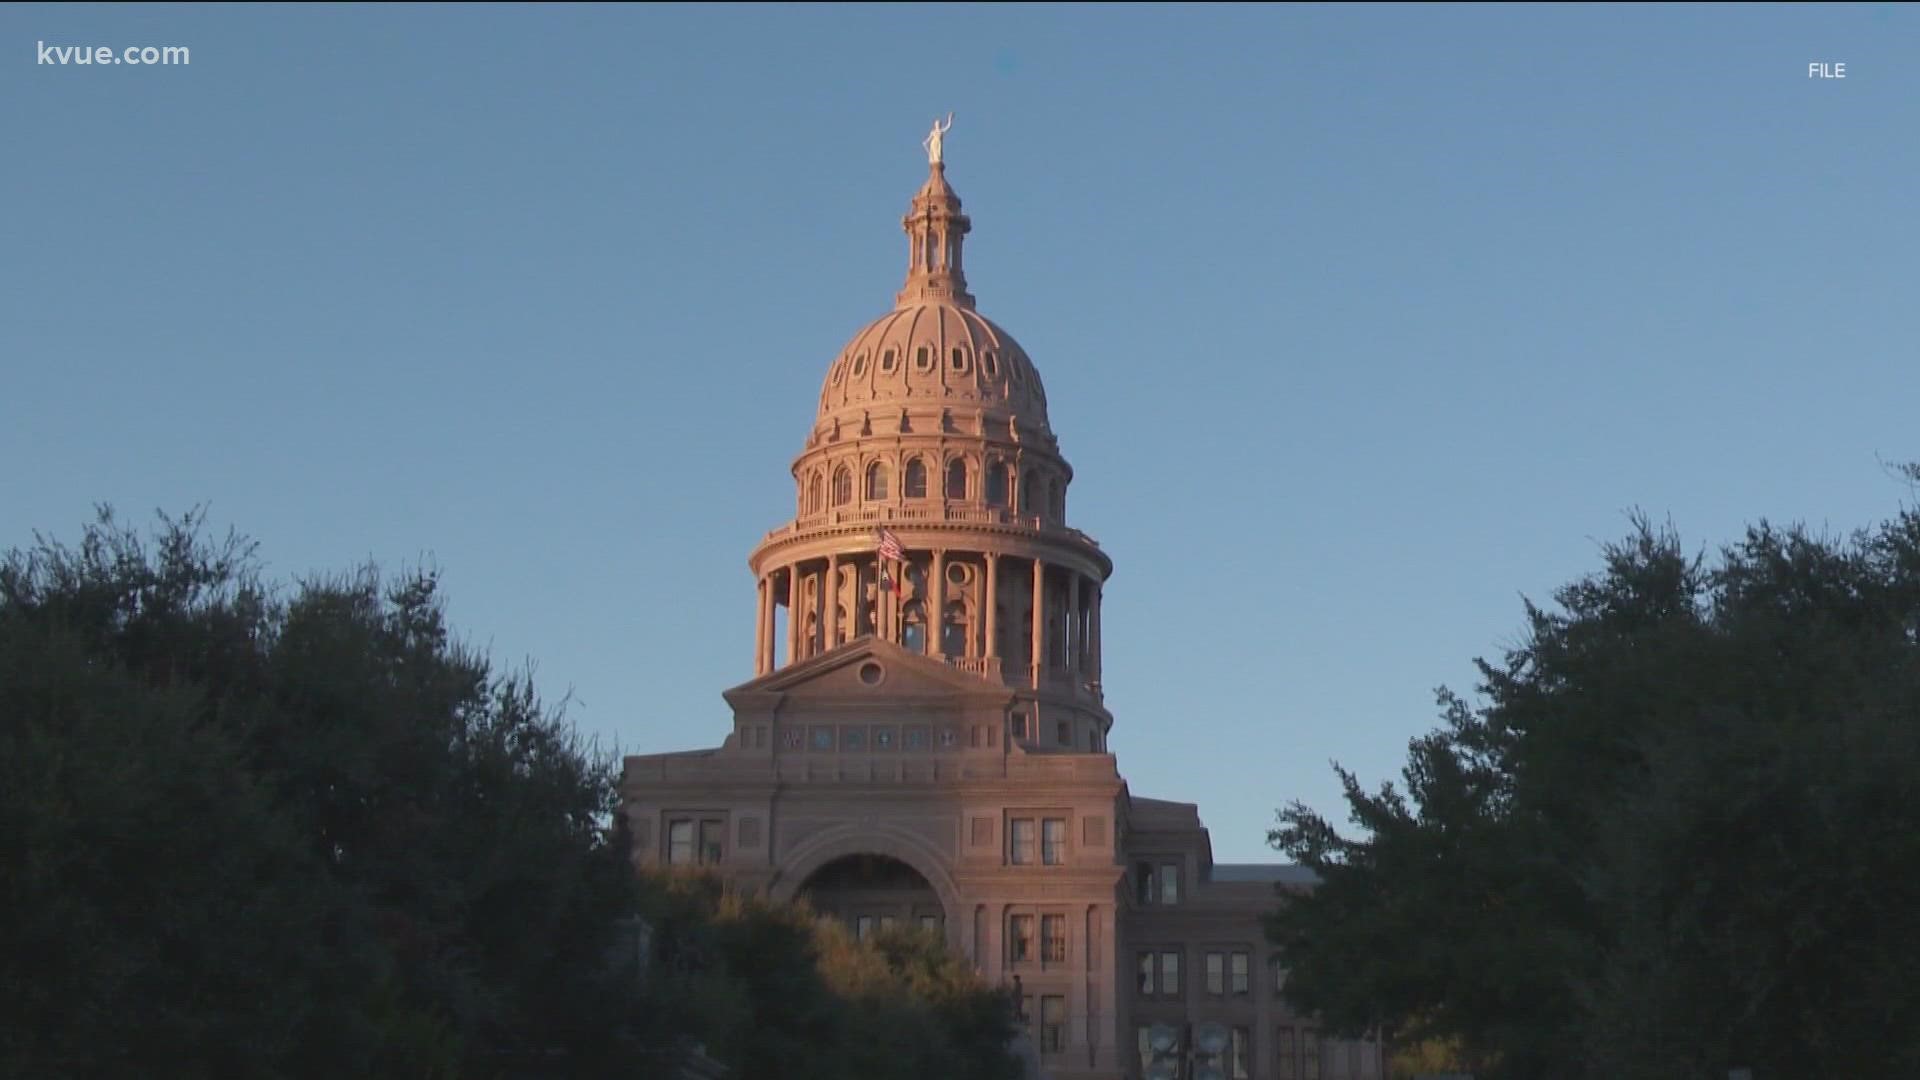 Texas lawmakers are requesting that Gov. Greg Abbott call a special session. KVUE's Bryce Newberry explains what steps the governor has taken so far.